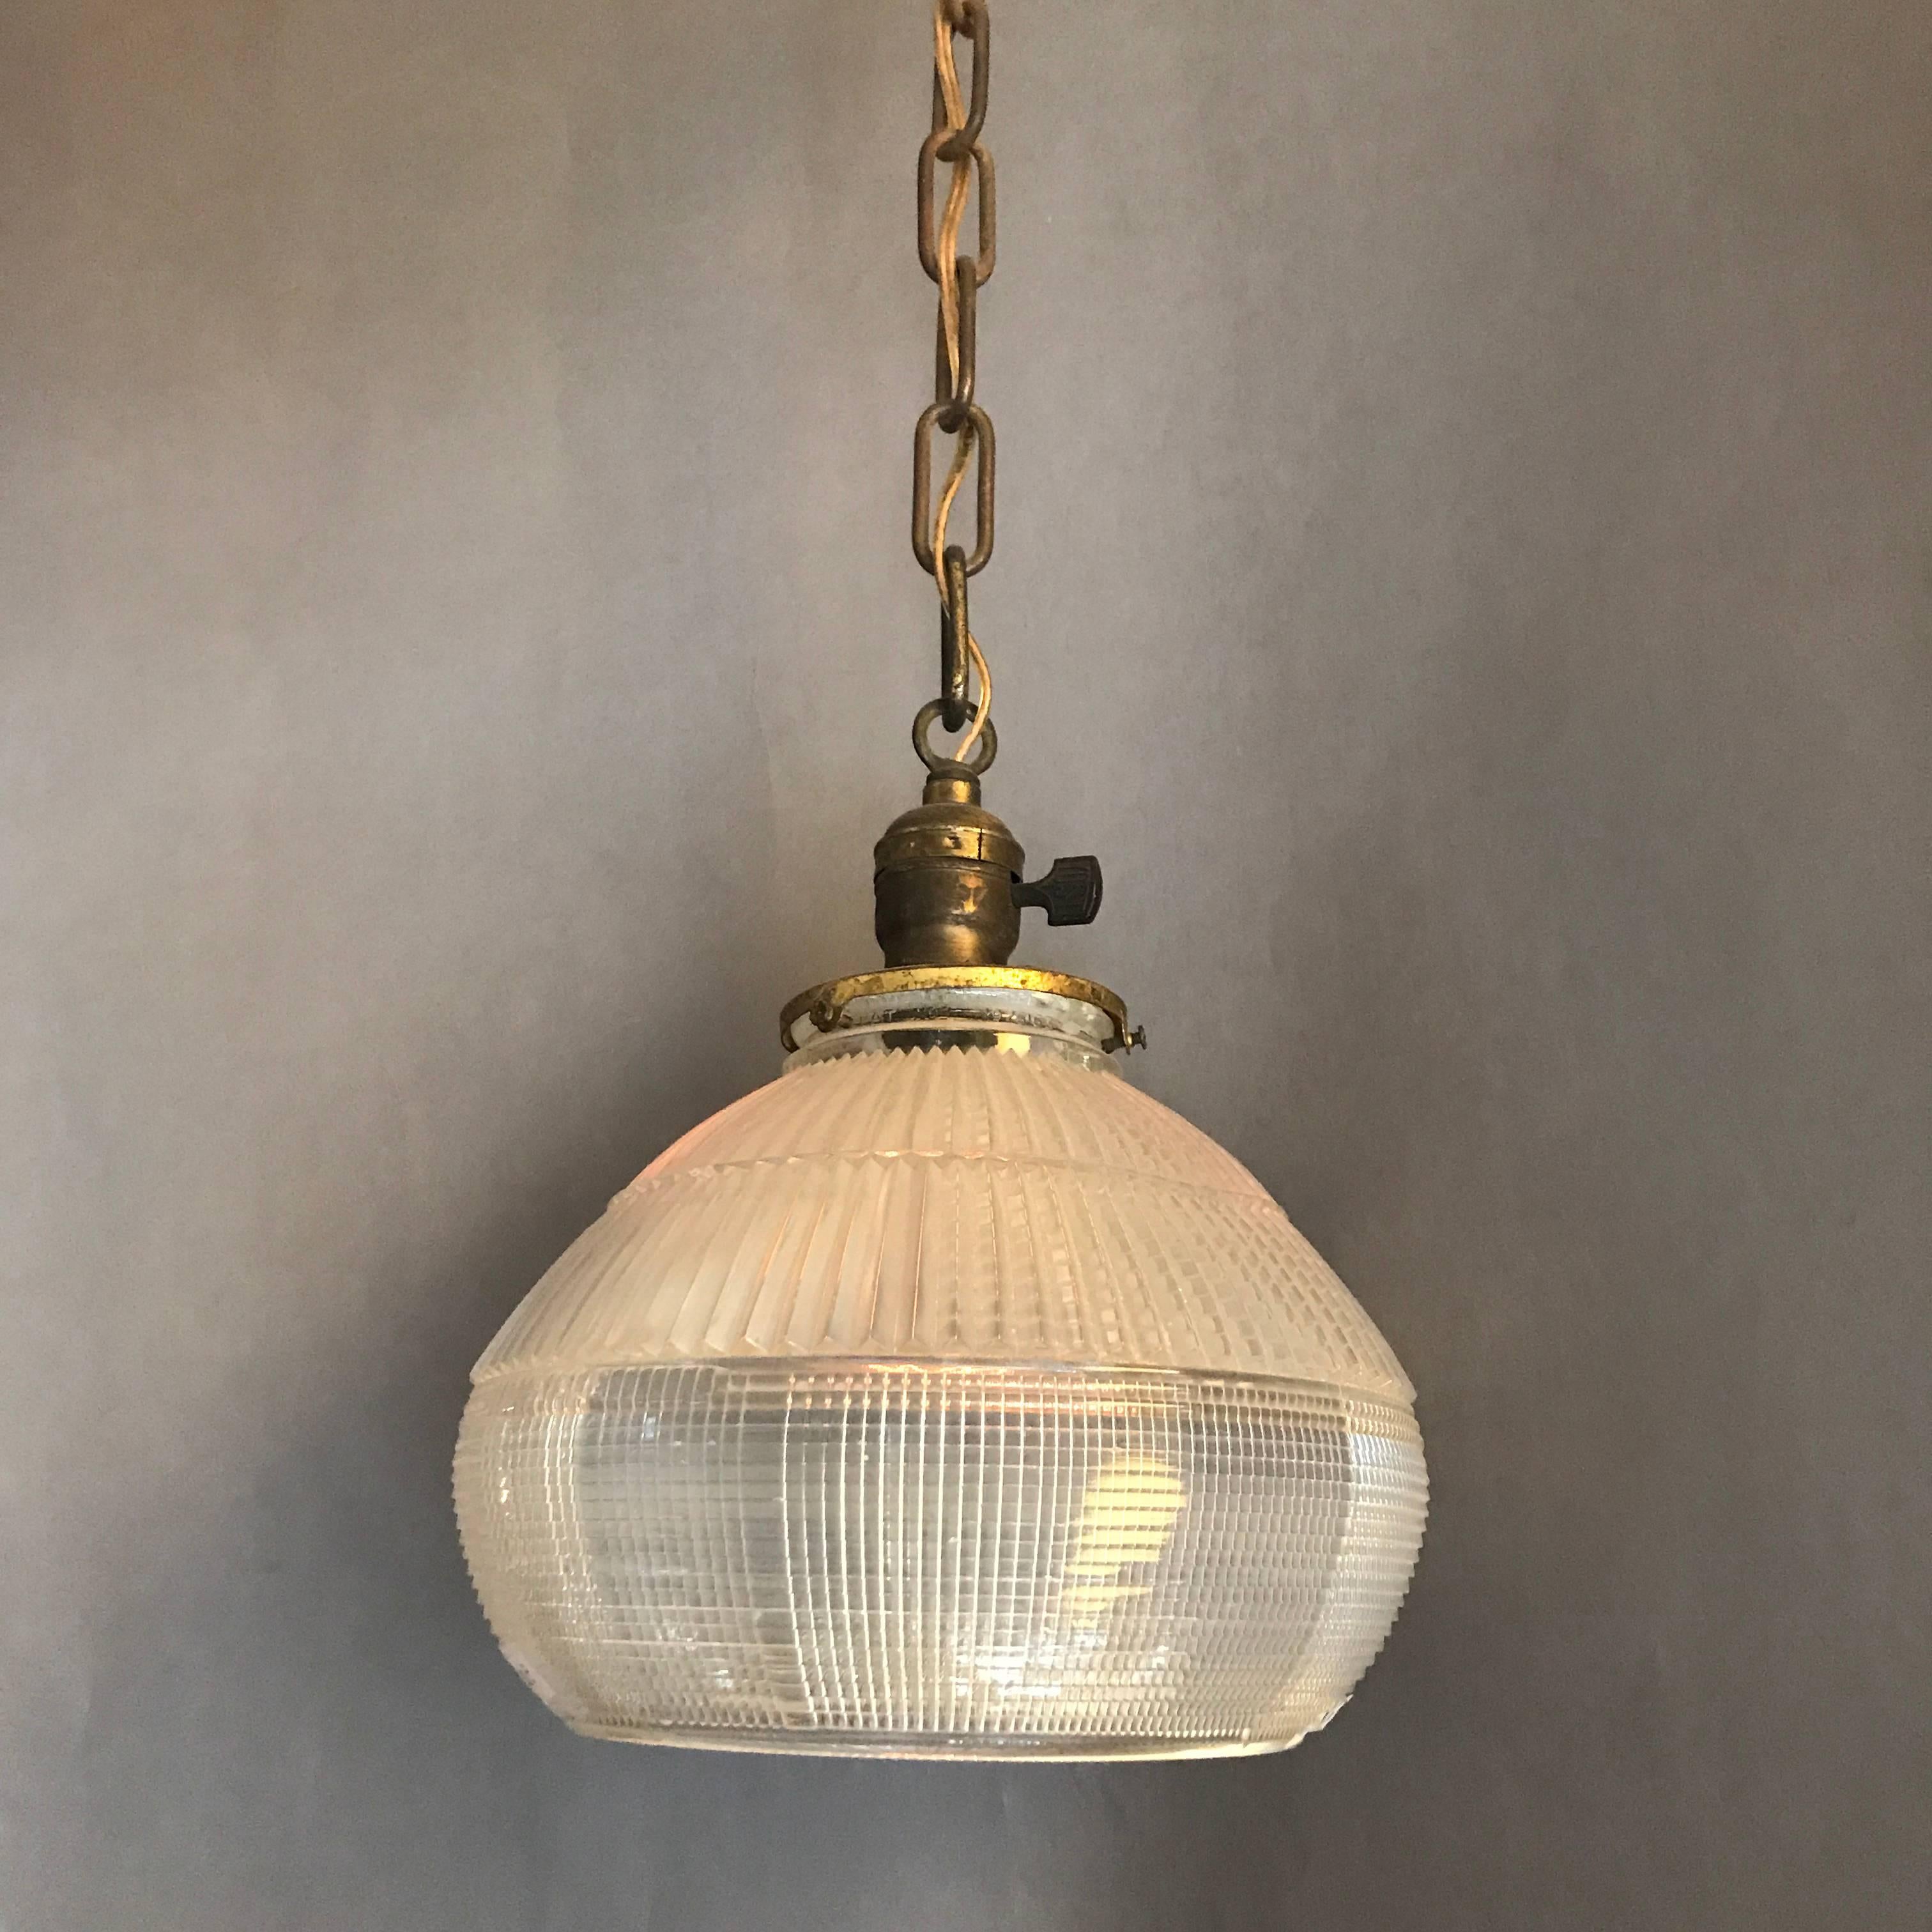 Industrial, factory, pendant light features prismatic, Holophane glass shades with brass fitter. The pendant is newly wired for 200 watts.

Overall height 32in. ht.